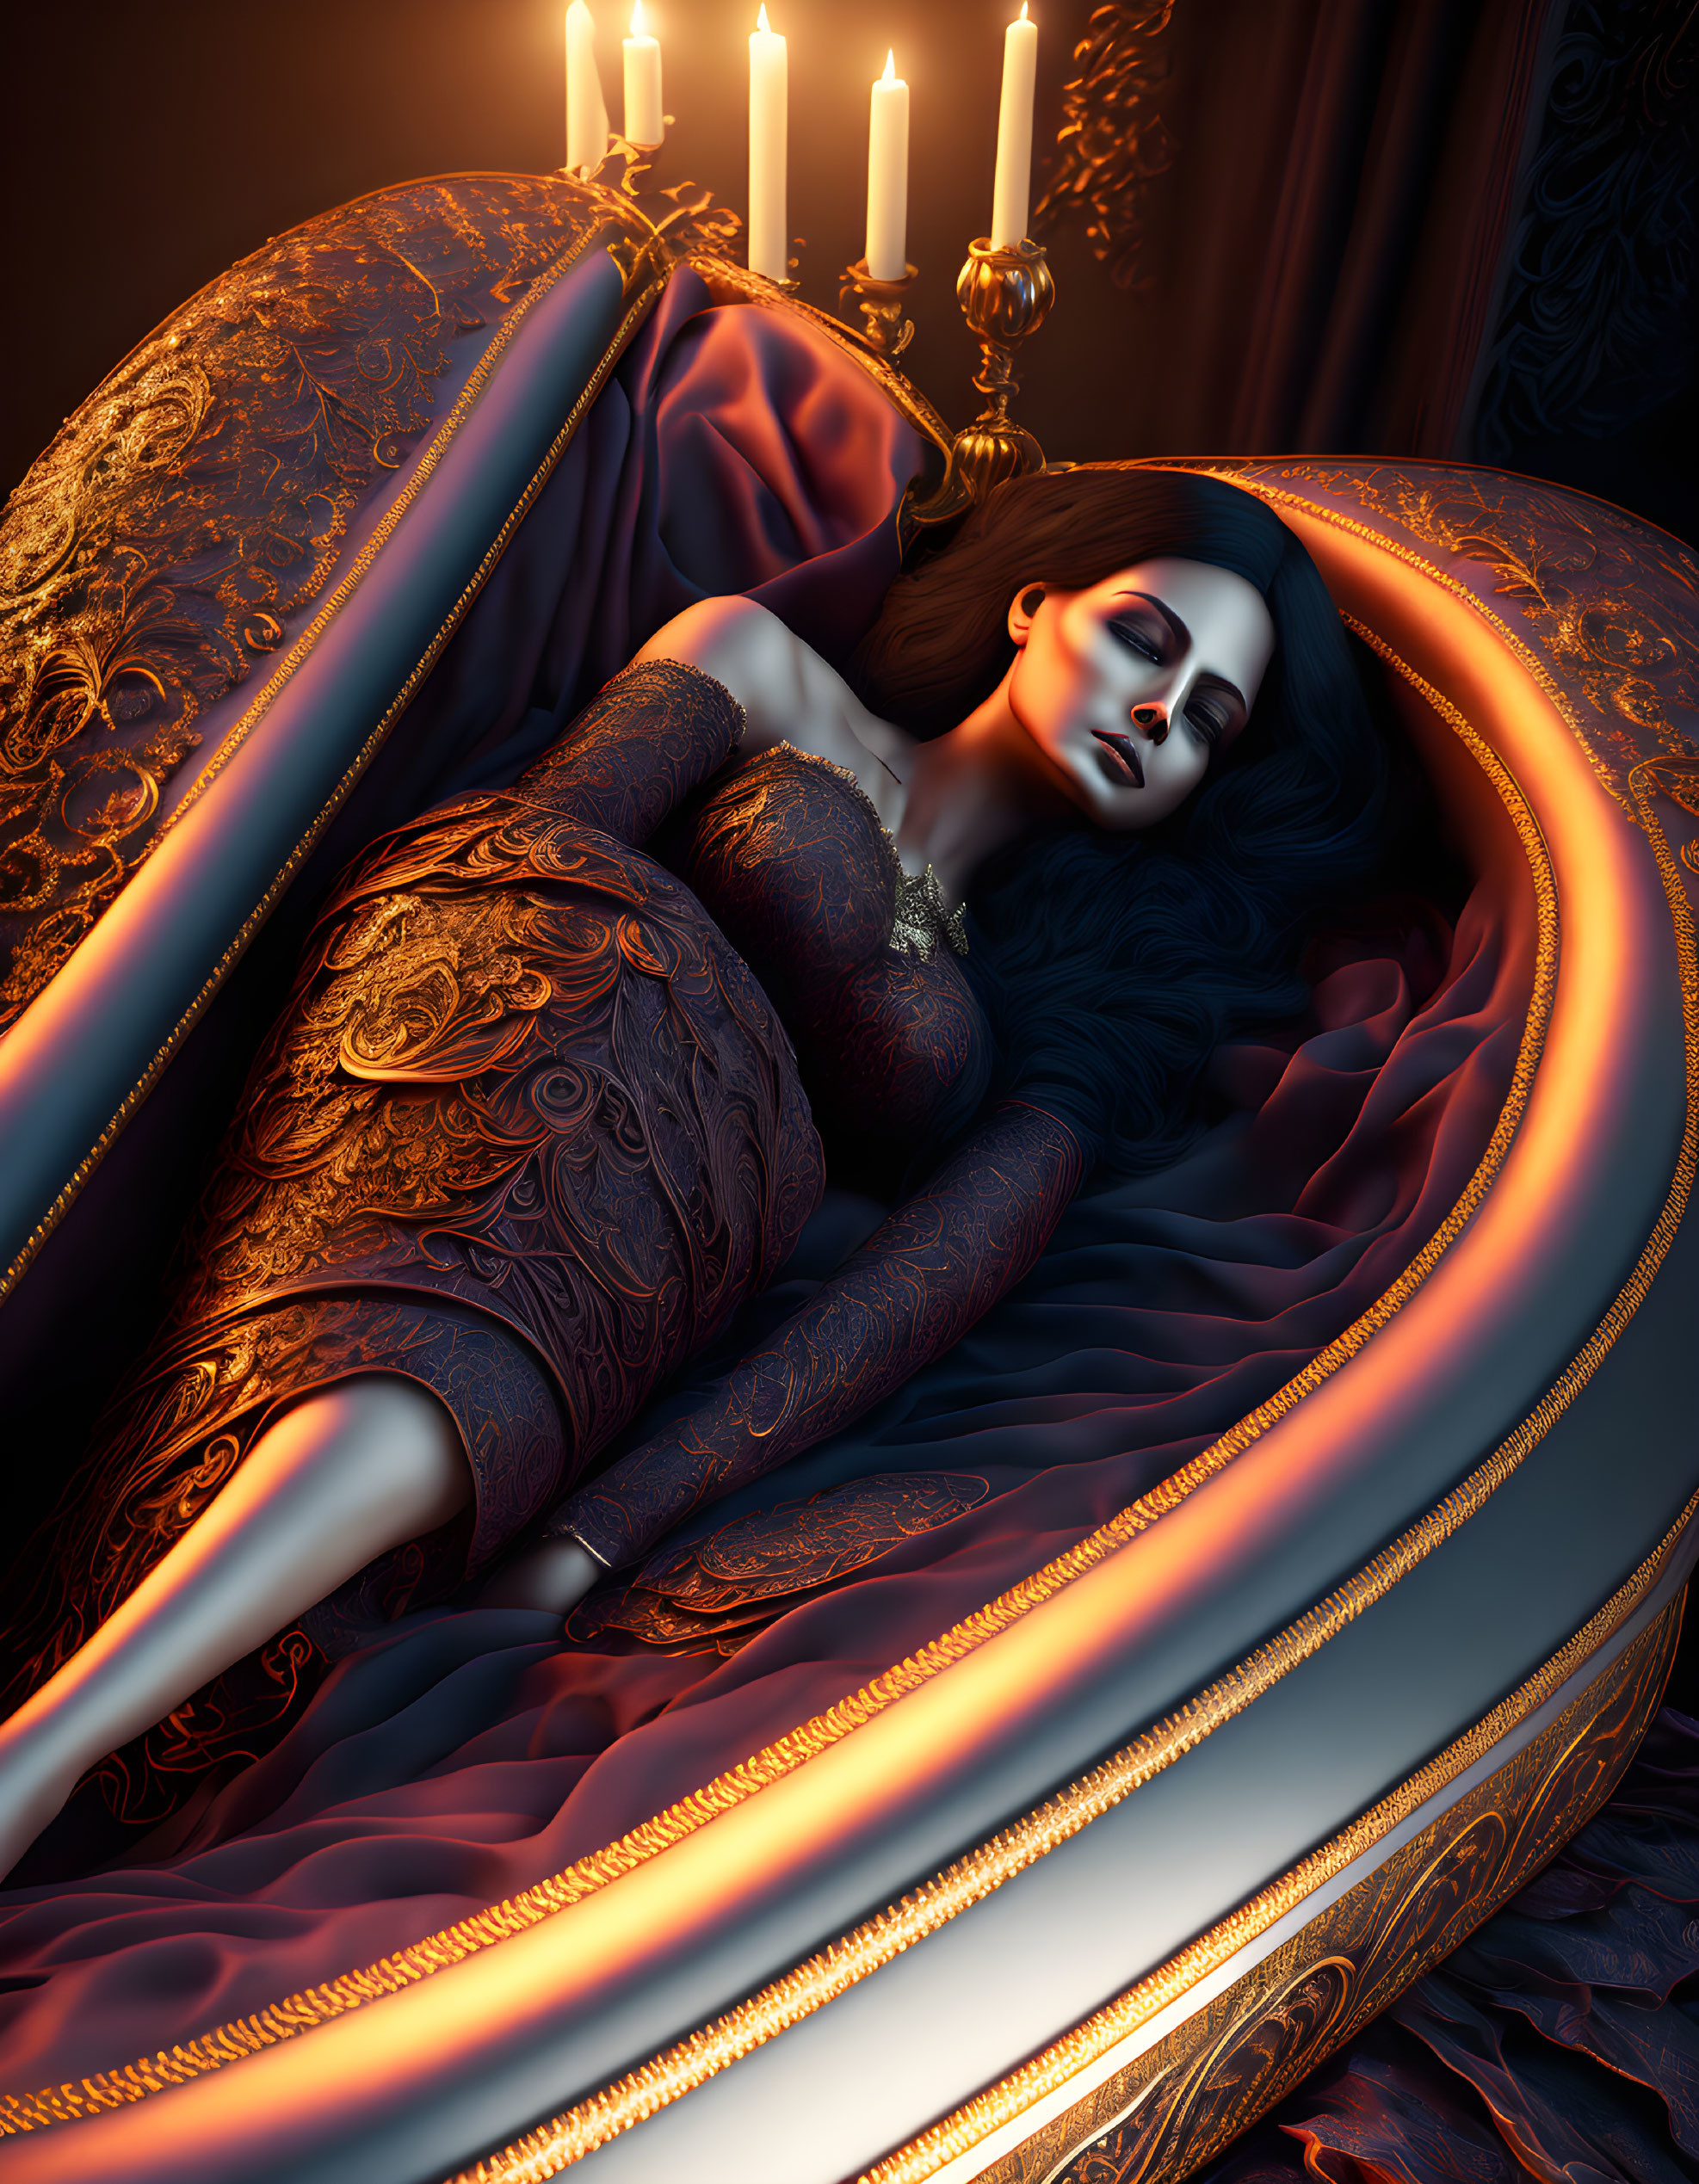 Gothic-style Woman on Chaise with Candles in Luxurious Gown